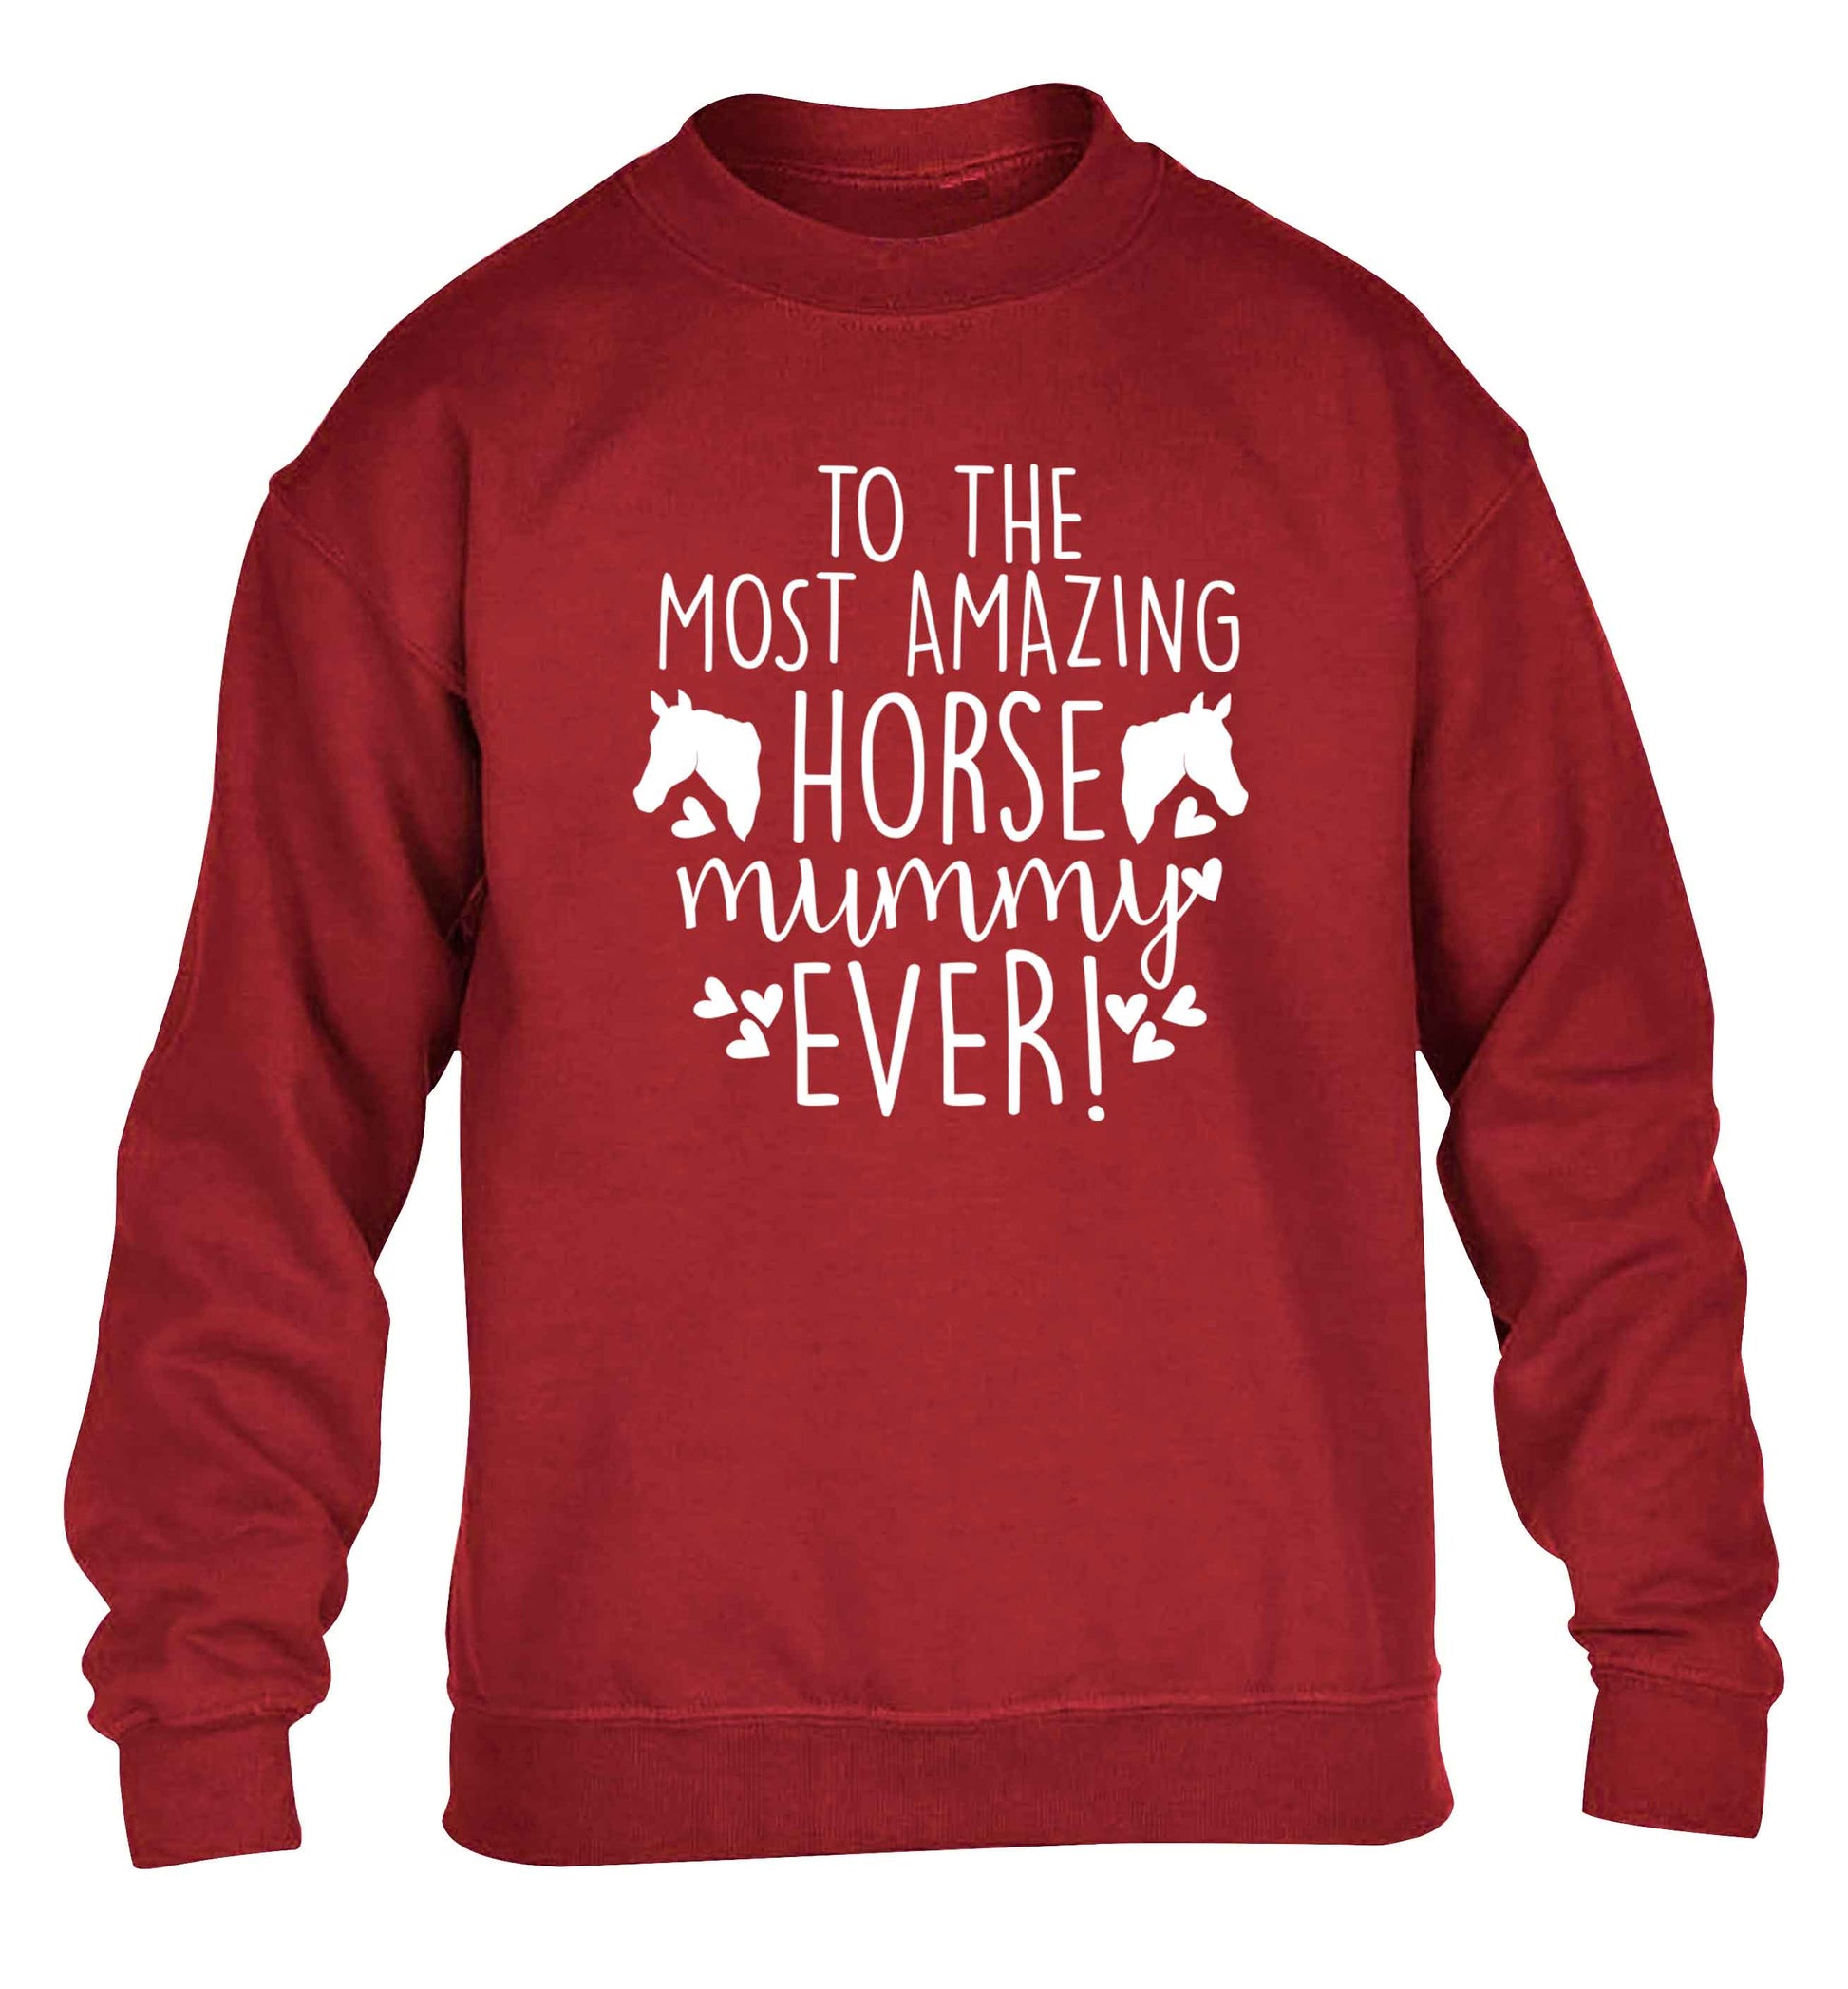 To the most amazing horse mummy ever! children's grey sweater 12-13 Years